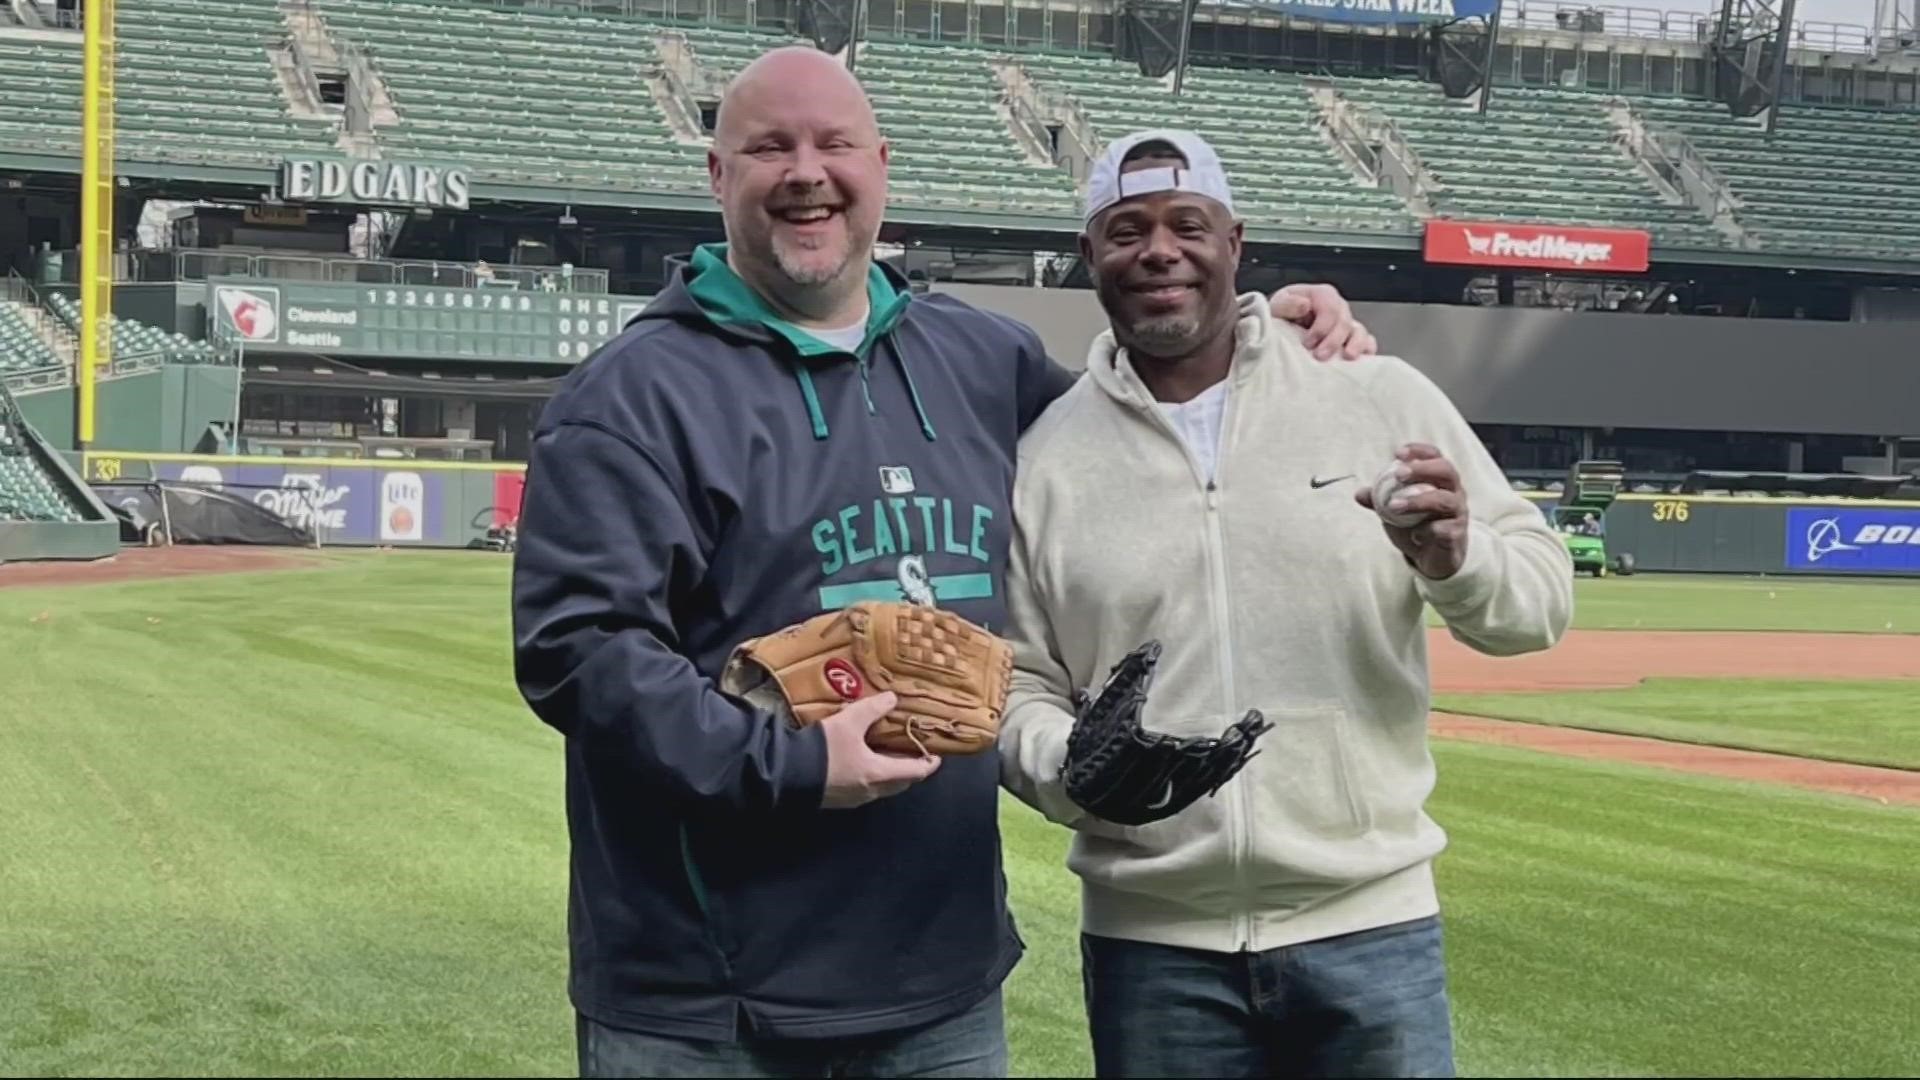 John Scukanec wrapped up his year at T-Mobile Park in Seattle, playing his 365th game of catch with Mariners legend Ken Griffey Jr.